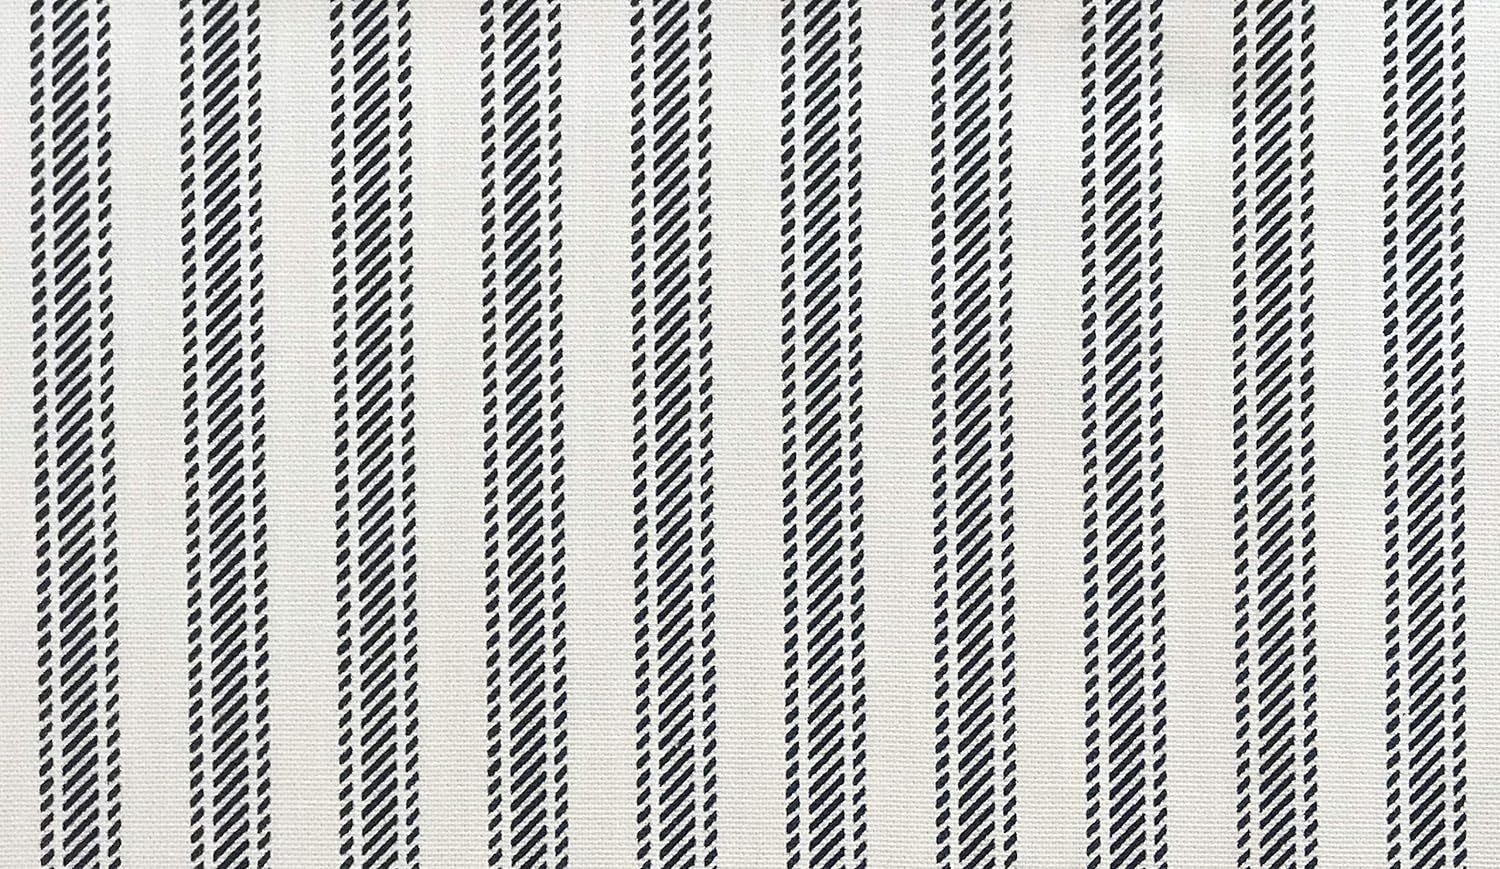 Custom Made Straight Valance in Navy Blue or Black and White Ticking Stripe, 100% Cotton, Fully Lined, Ready to Hang